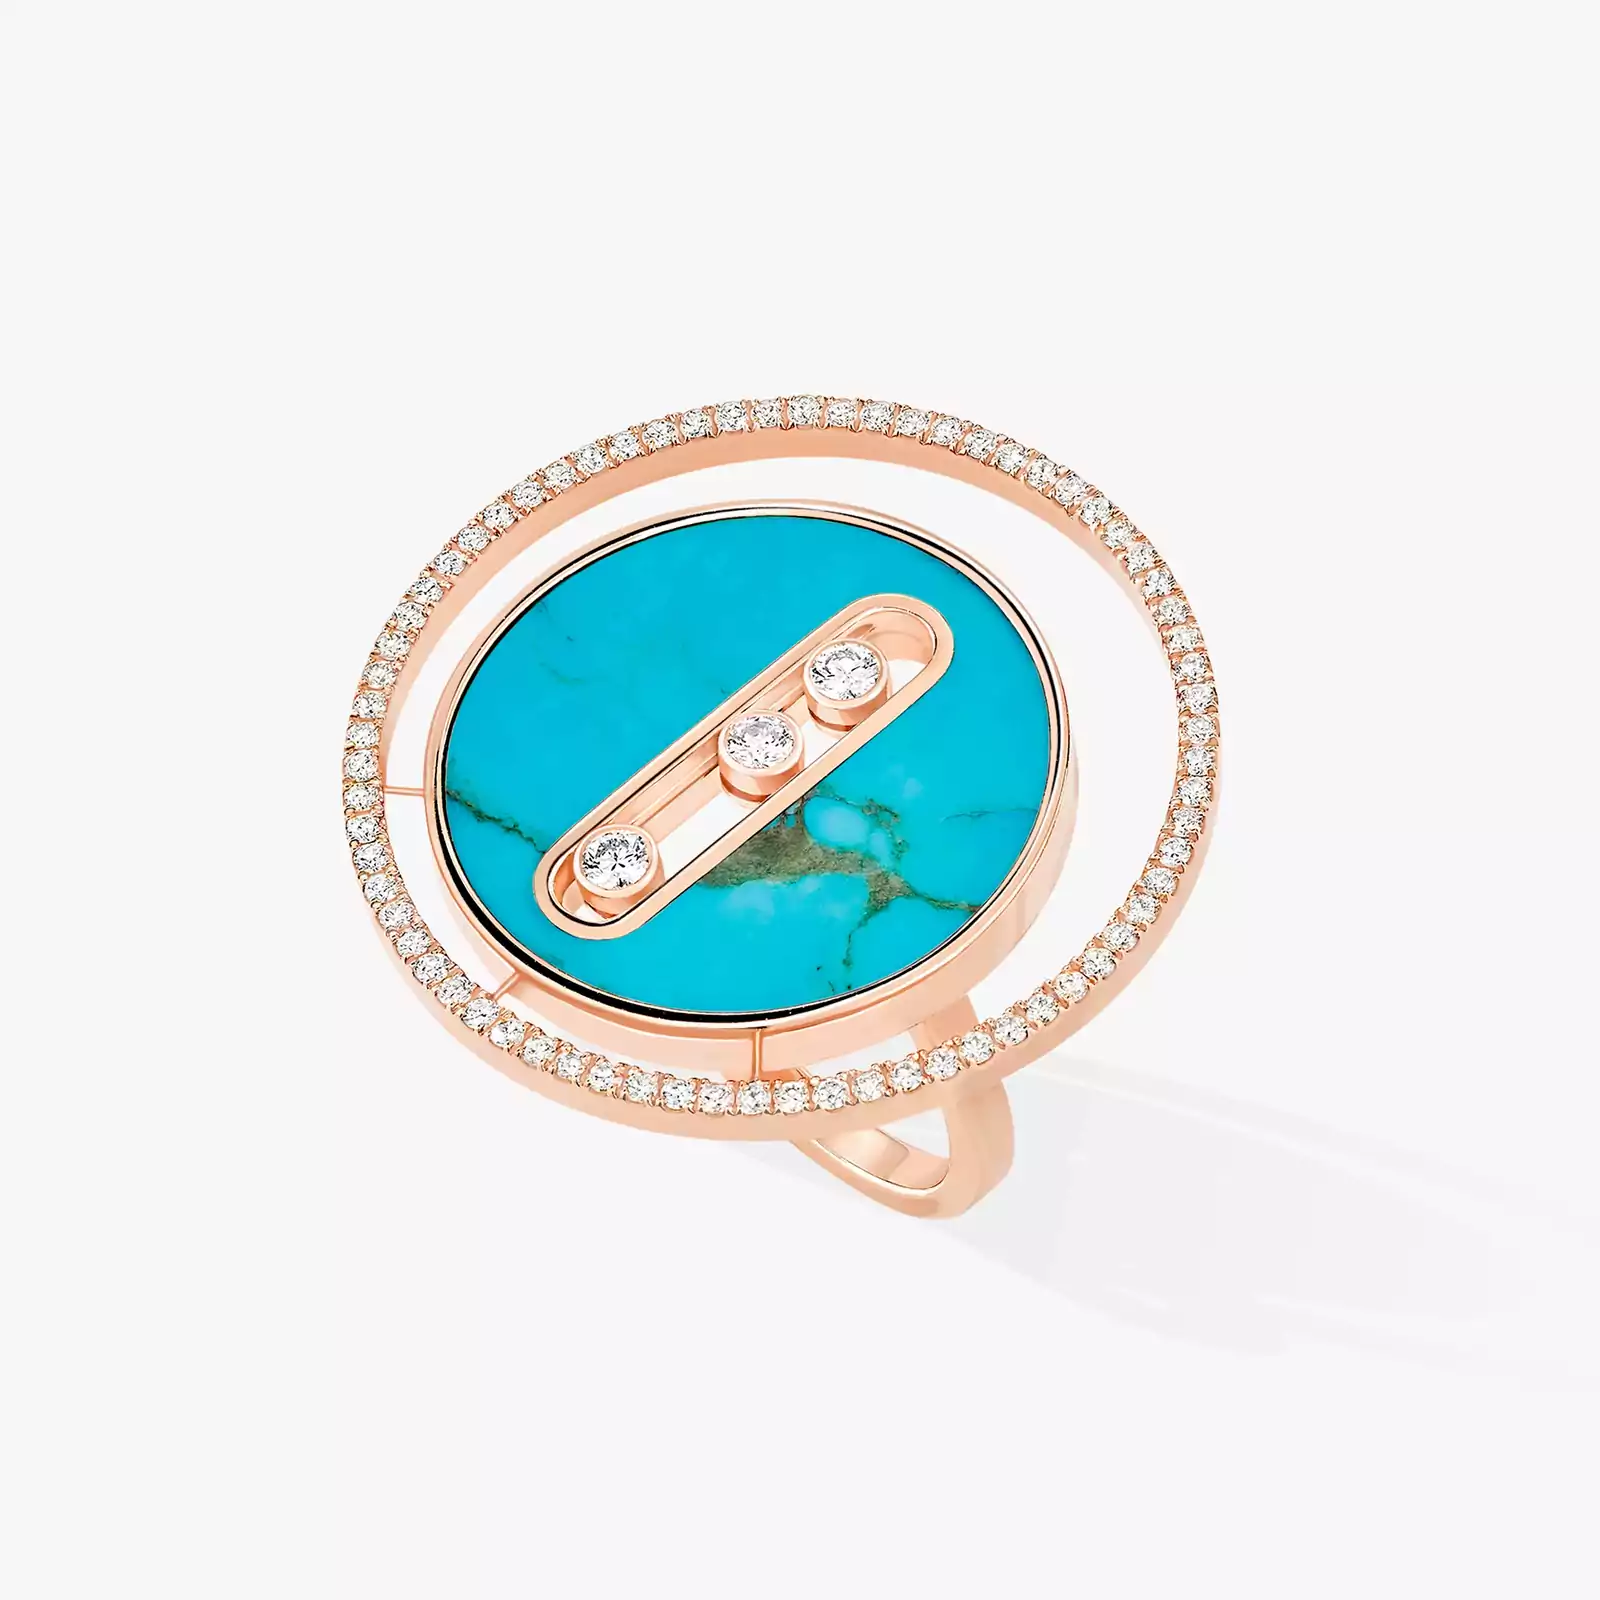 Ring For Her Pink Gold Diamond Turquoise Lucky Move LM 11721-PG